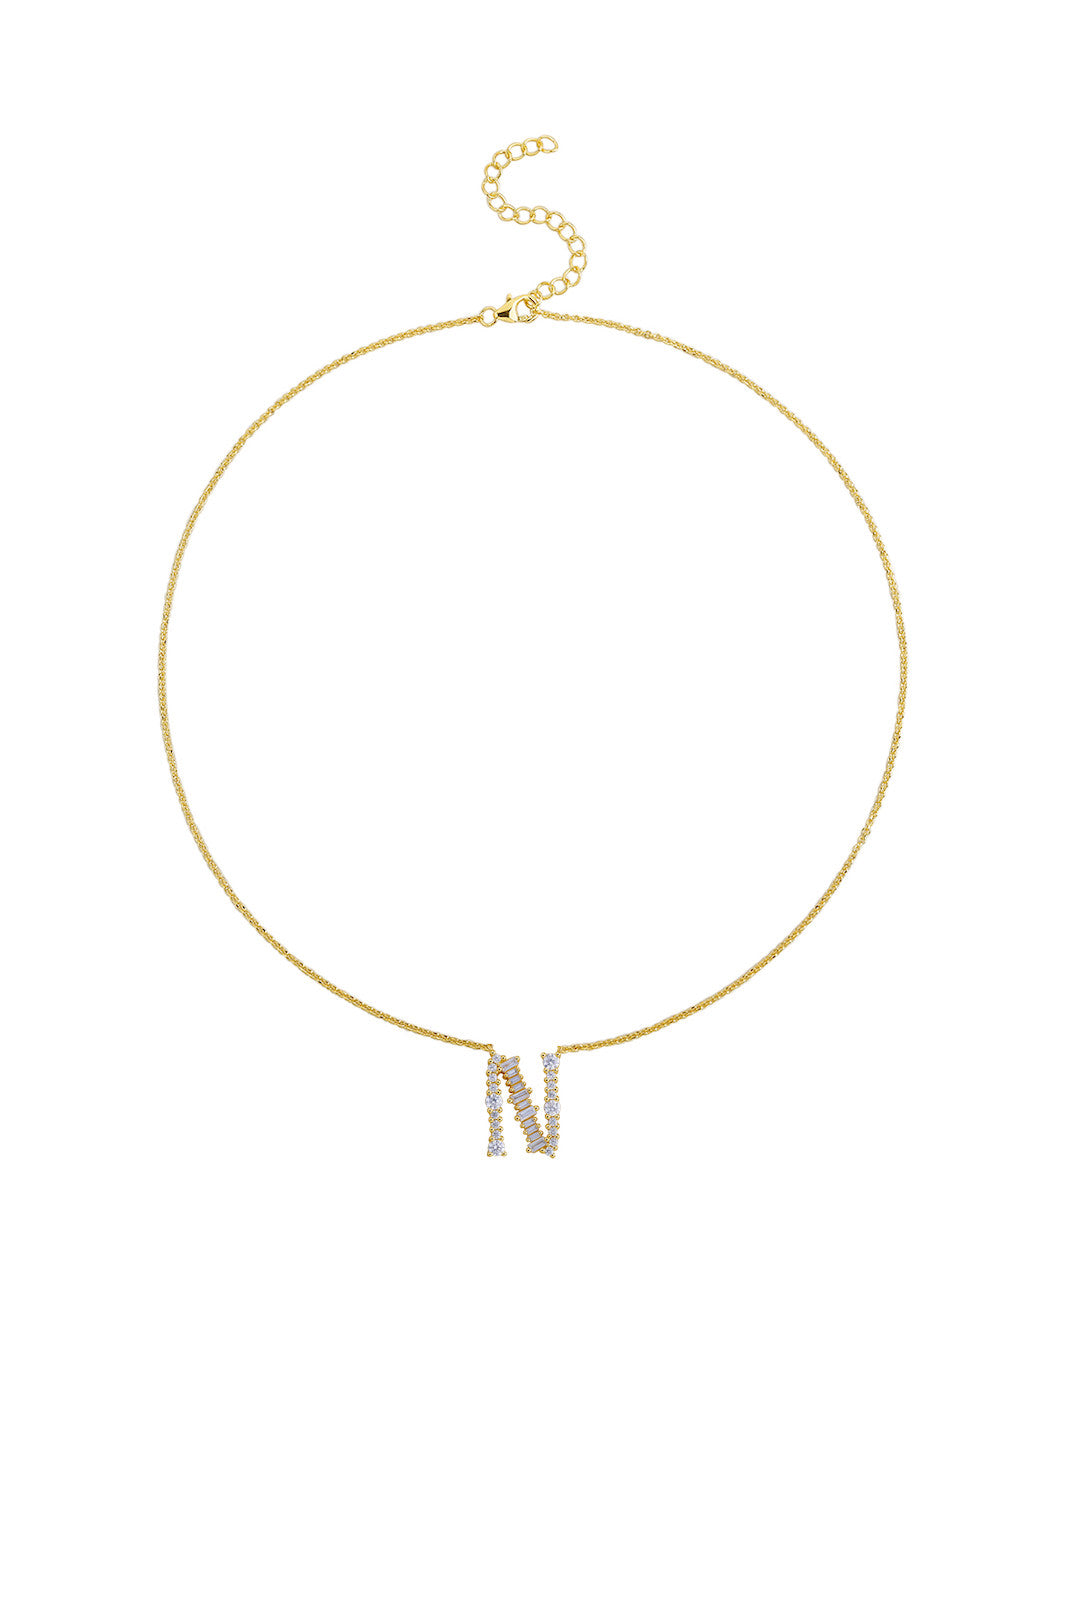 Gold Plated Sterling Silver Initial Necklace - Letter N Detail